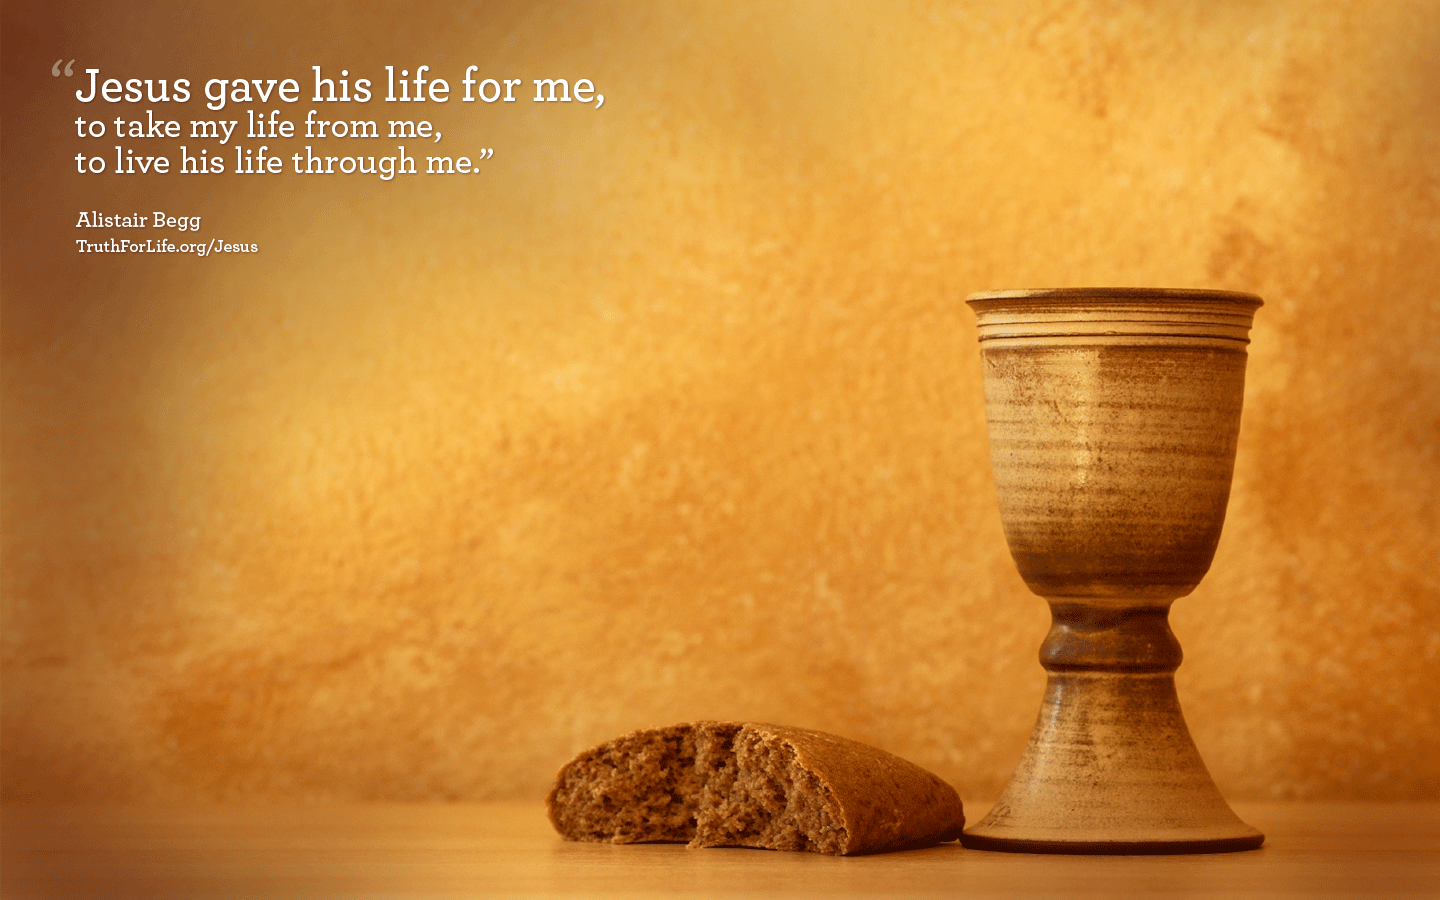 Wallpaper: "Jesus gave his life for me." for Life